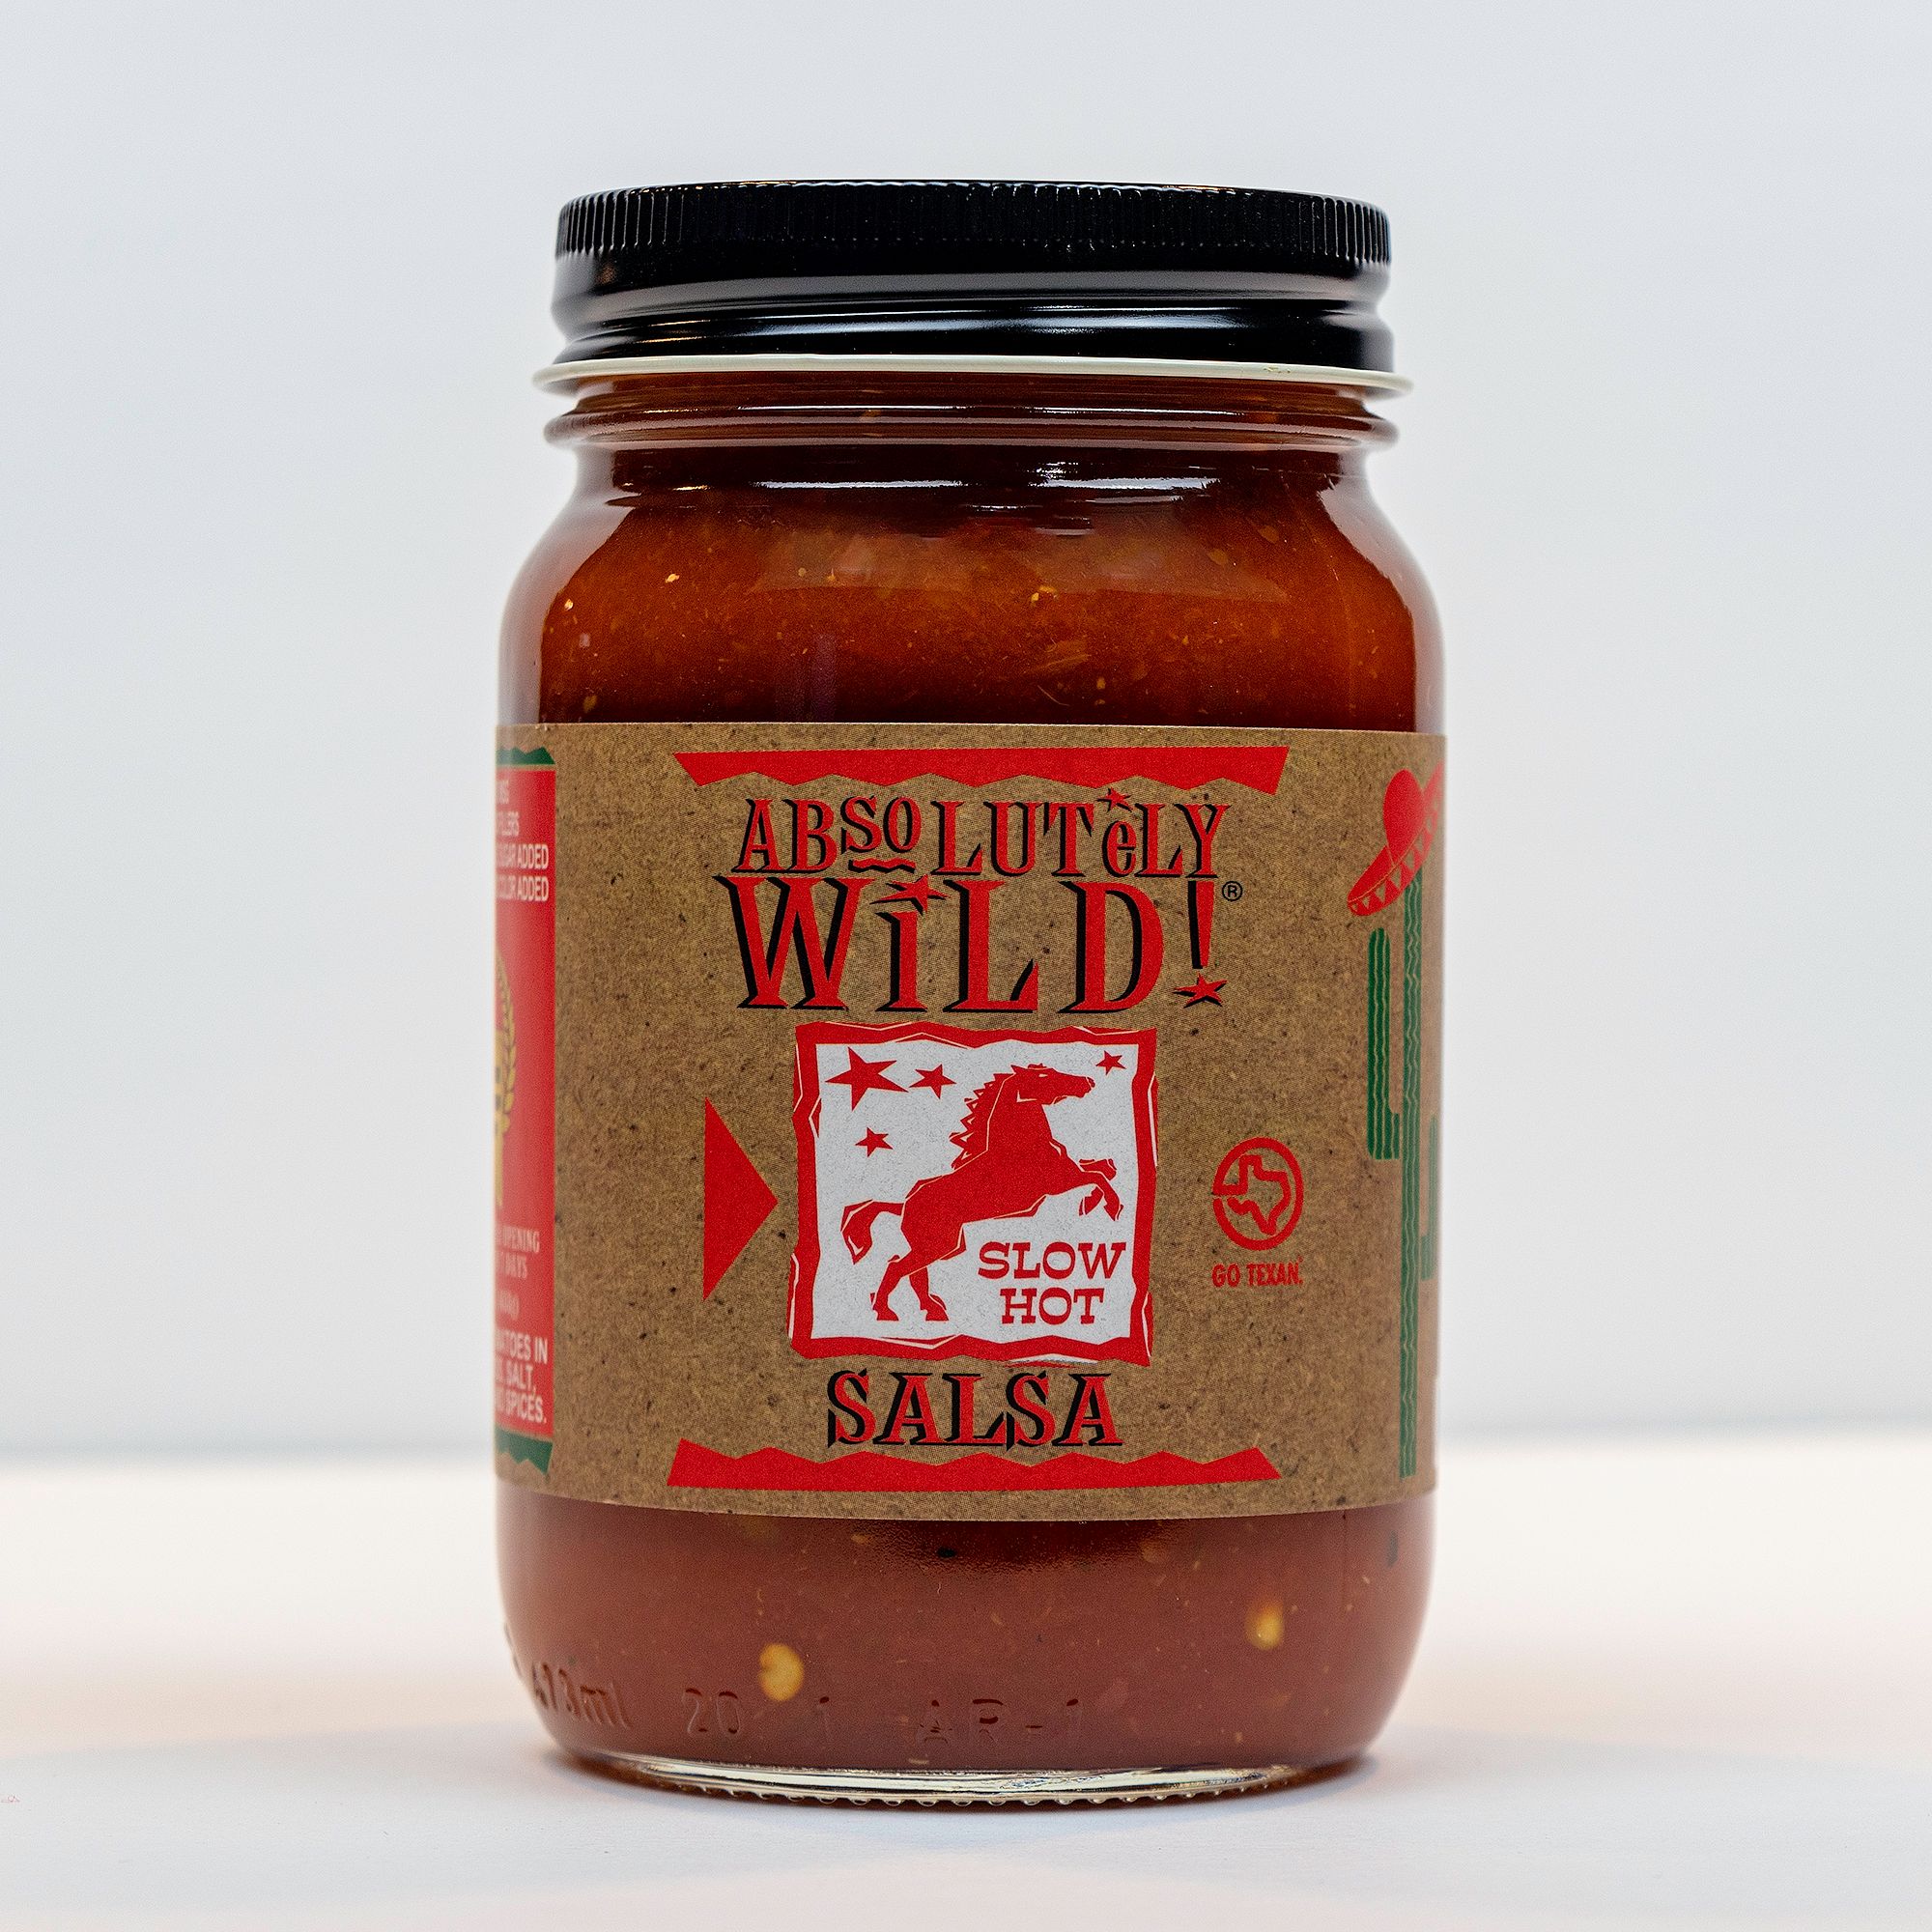 Absolutely Wild Slow Hot Salsa